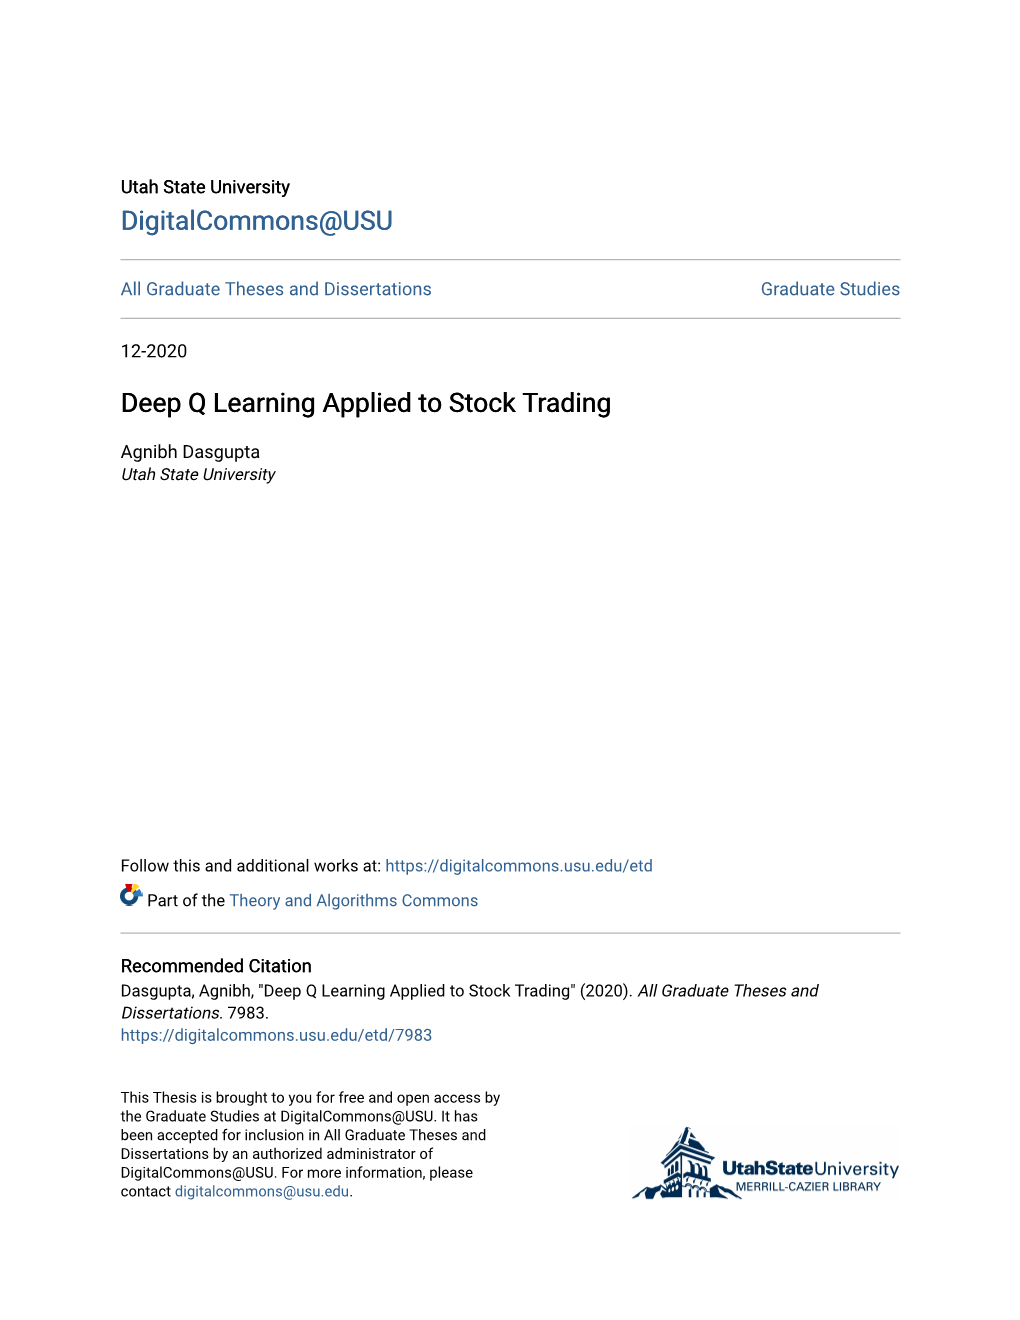 Deep Q Learning Applied to Stock Trading